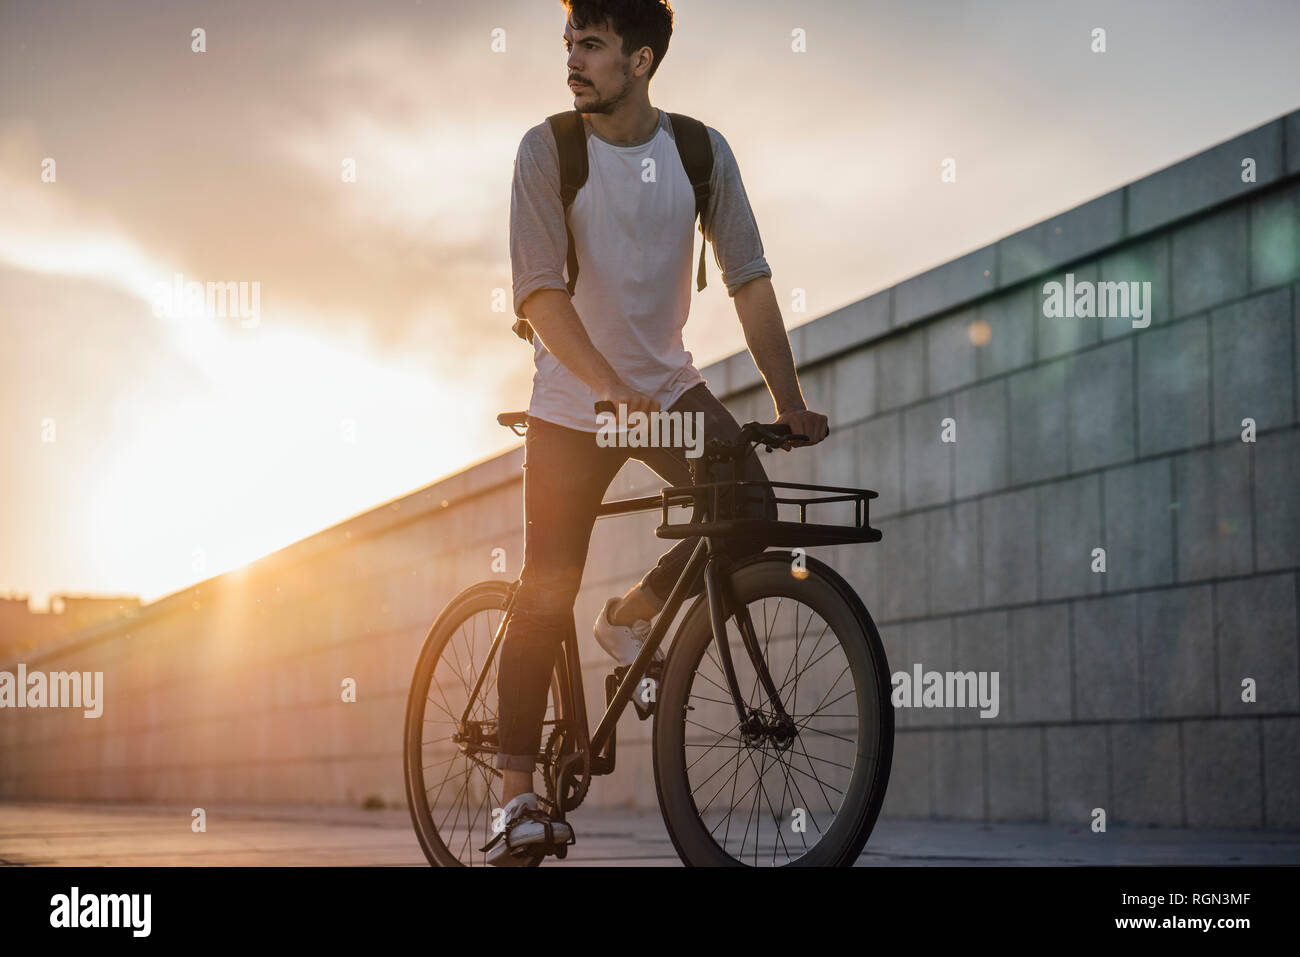 Young man with backpack riding bike on promenade at sunset Stock Photo